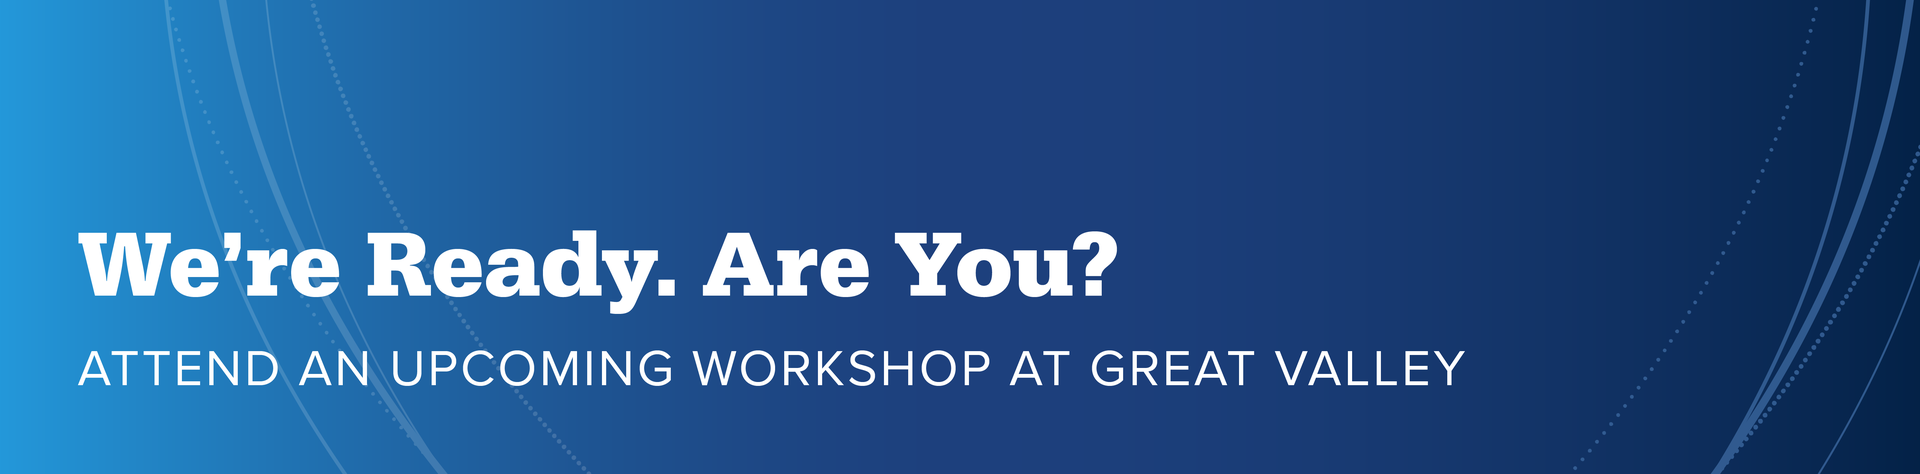 Header with text "We're Ready. Are You? Attend an Upcoming Workshop at Great Valley